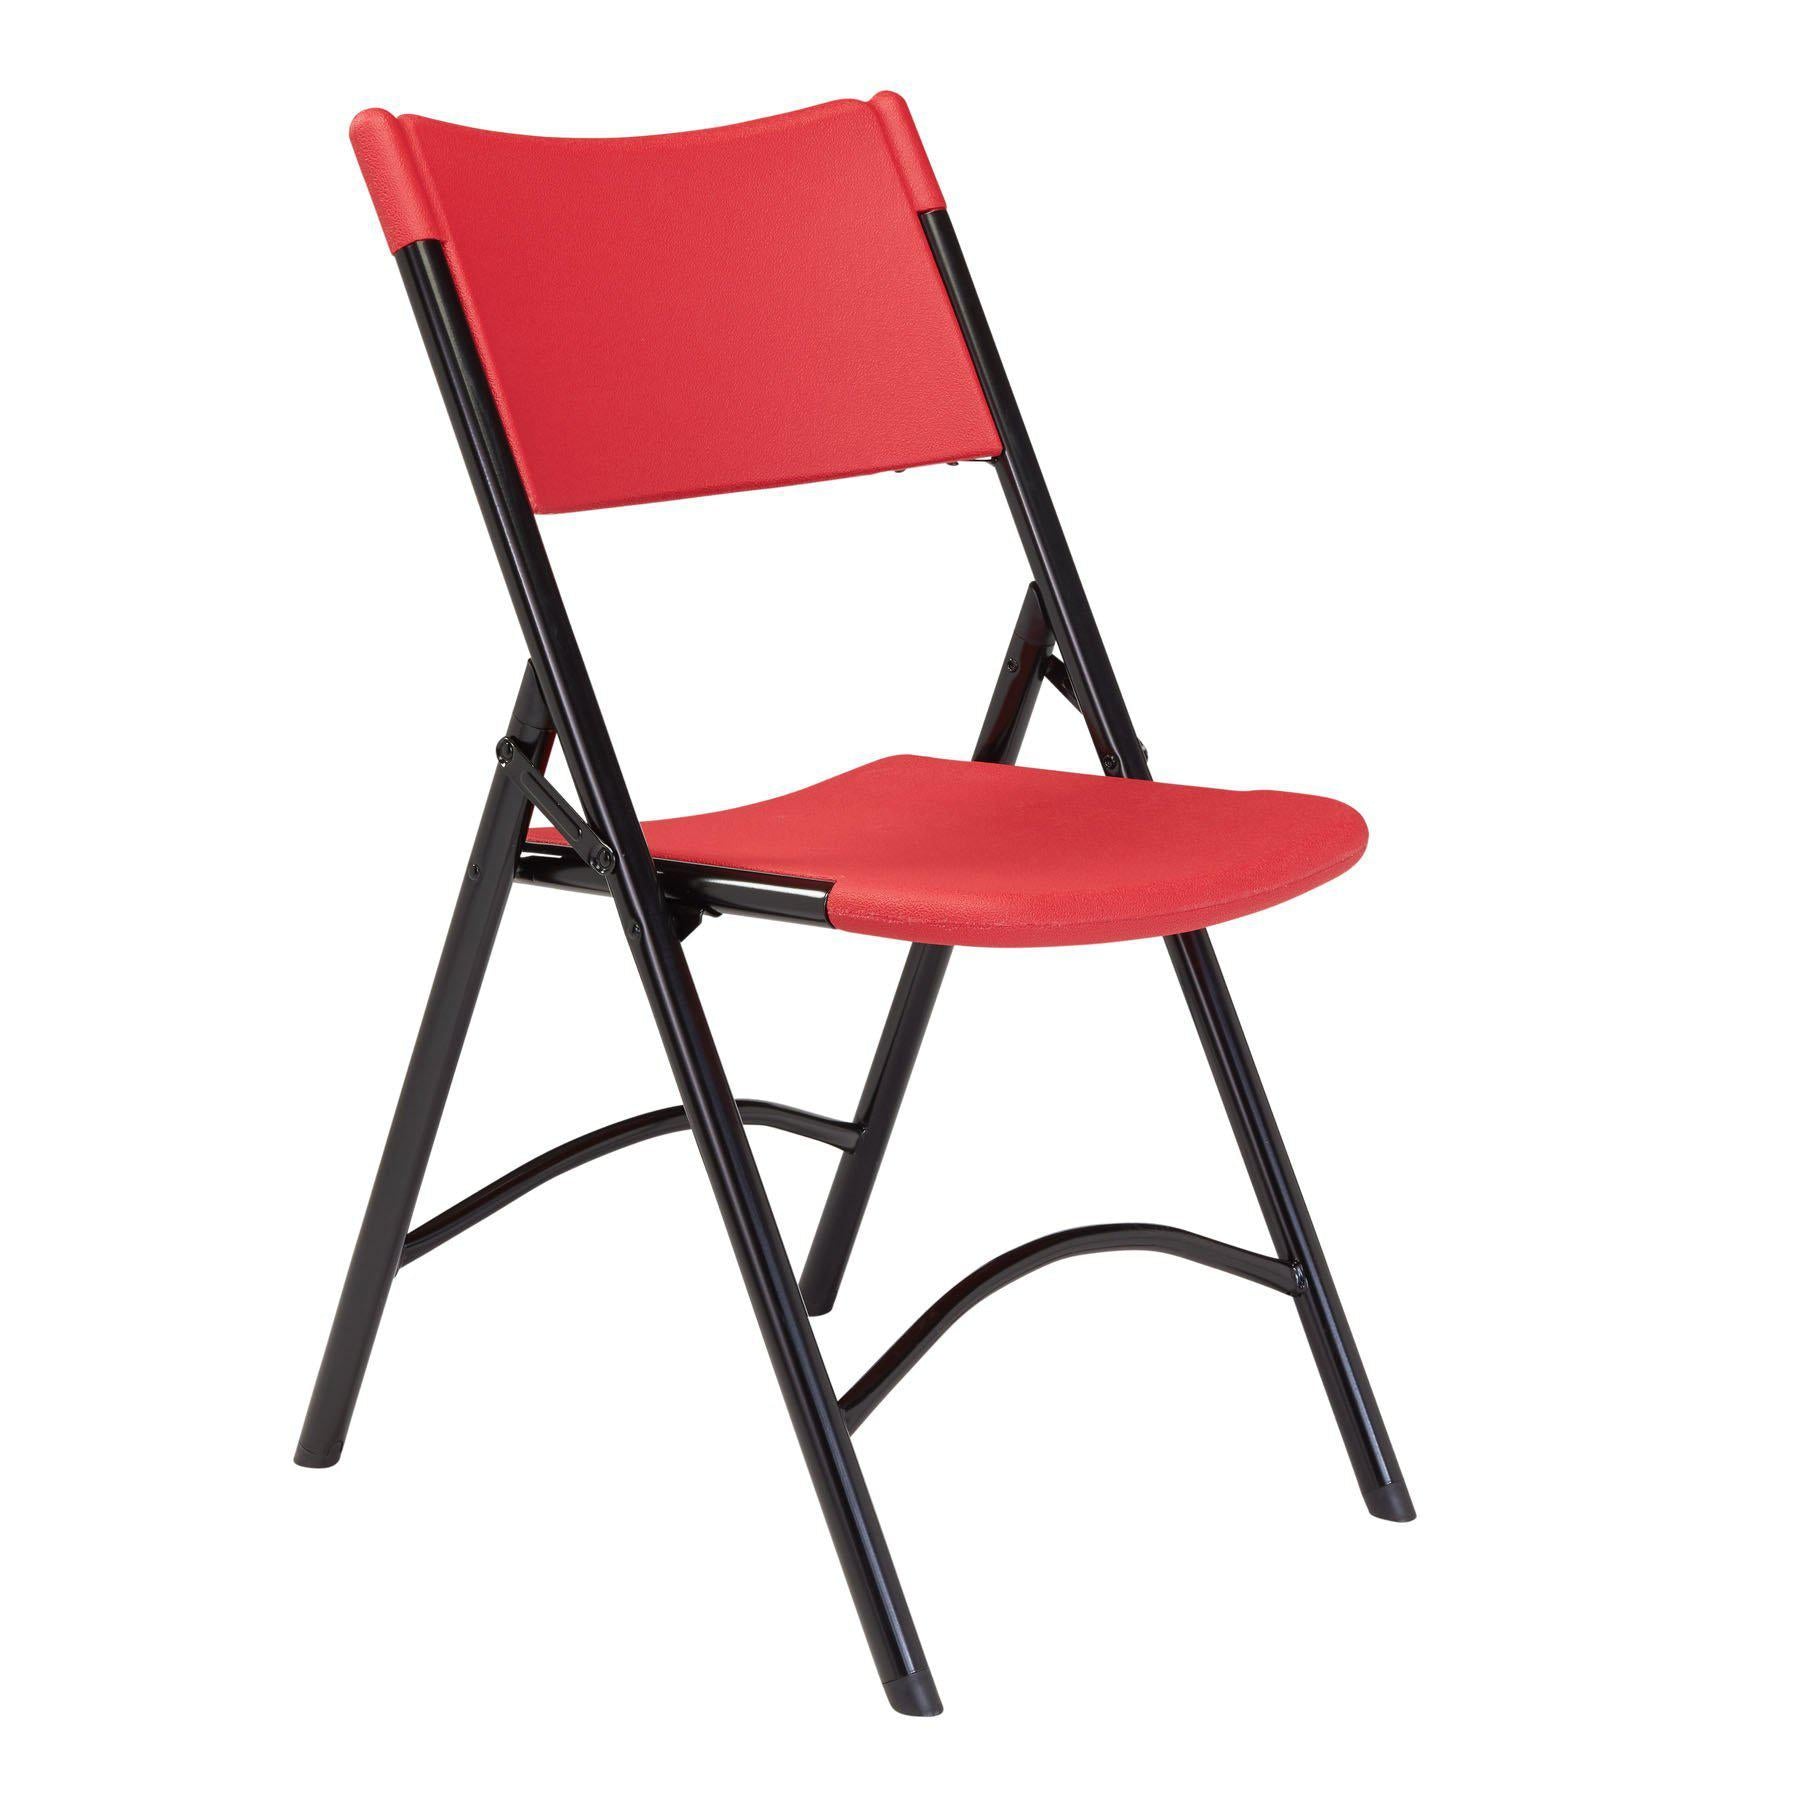 Heavy Duty Plastic Folding Chair (Carton of 4)-Chairs-Red Plastic/Black Frame-